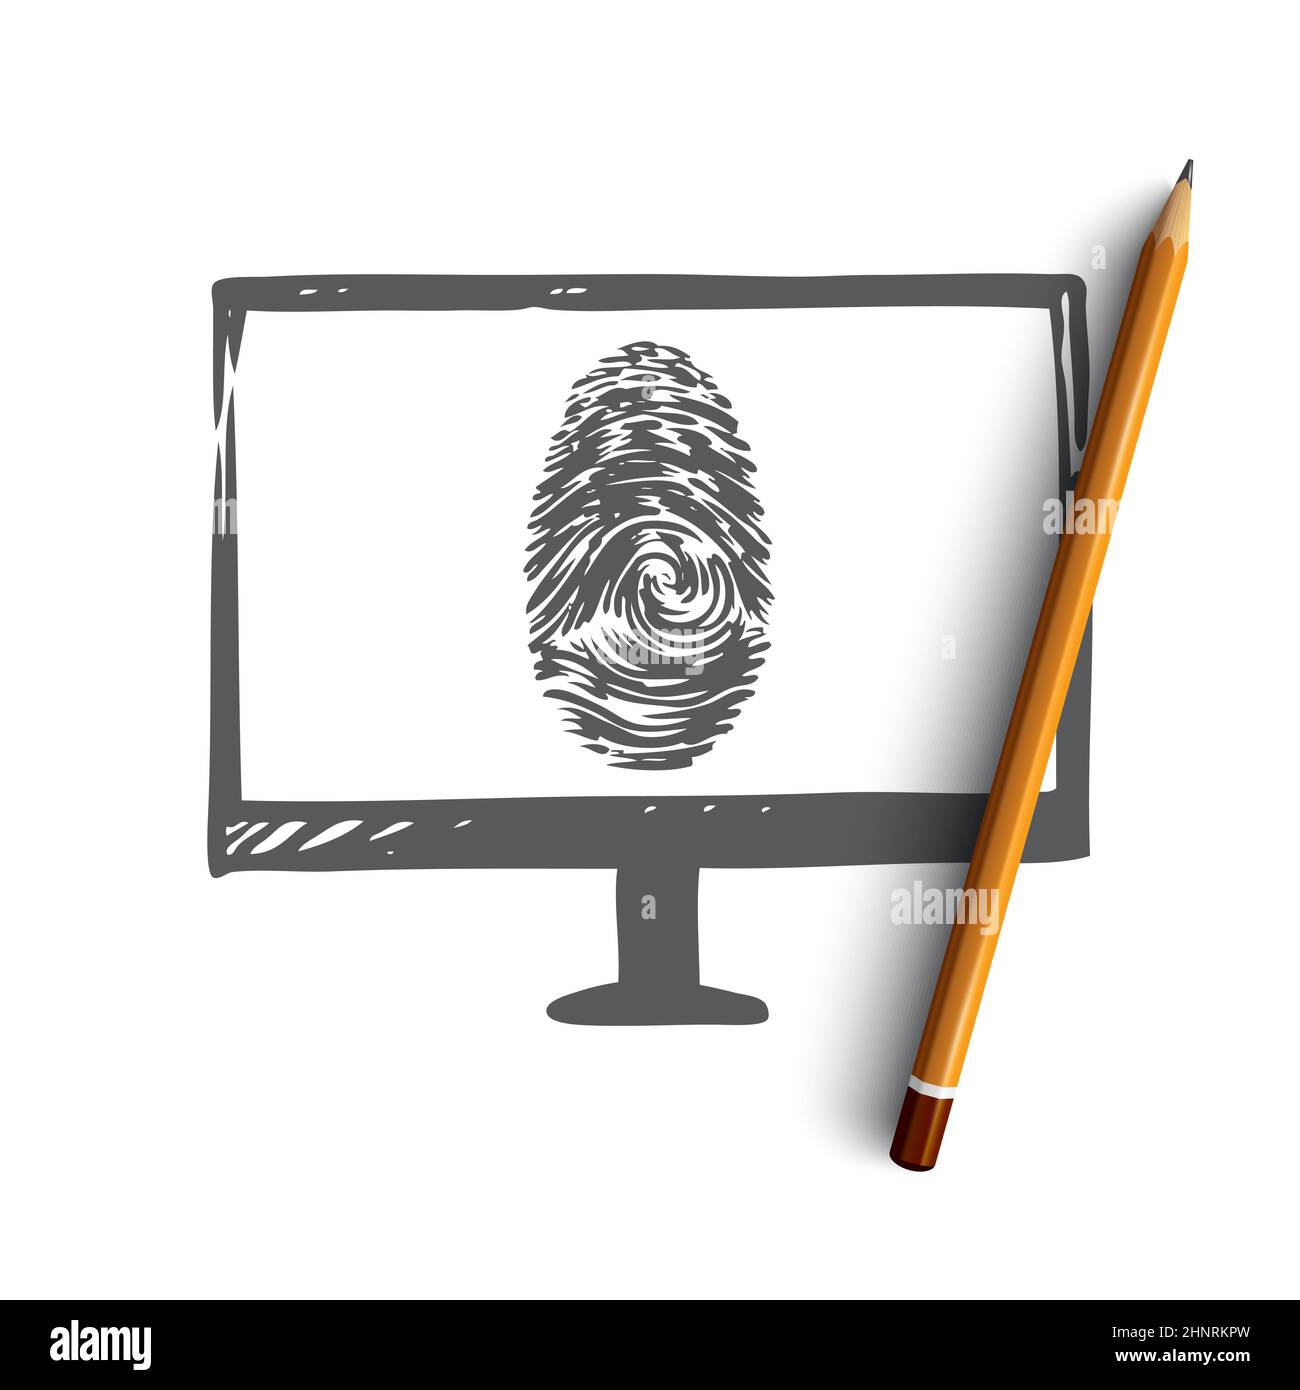 Fingerprints, computer, protection, security, data concept. Hand drawn human fingerprint on screen concept sketch. Isolated vector illustration. Stock Photo